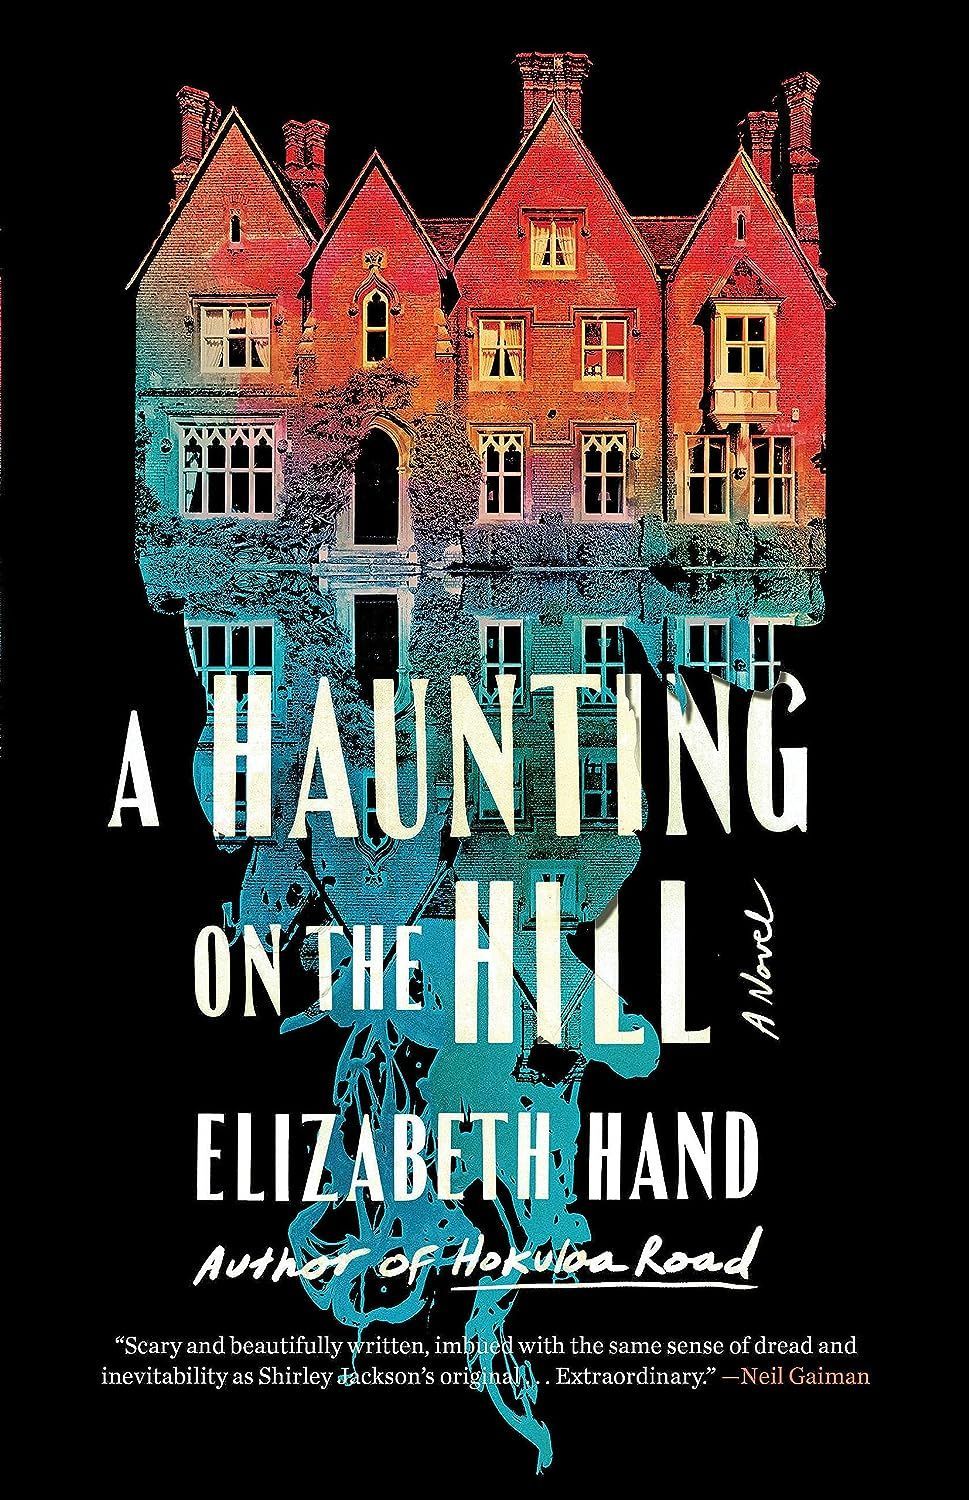 Listening for Echoes of Eleanor: On Elizabeth Hand’s “A Haunting on the Hill”